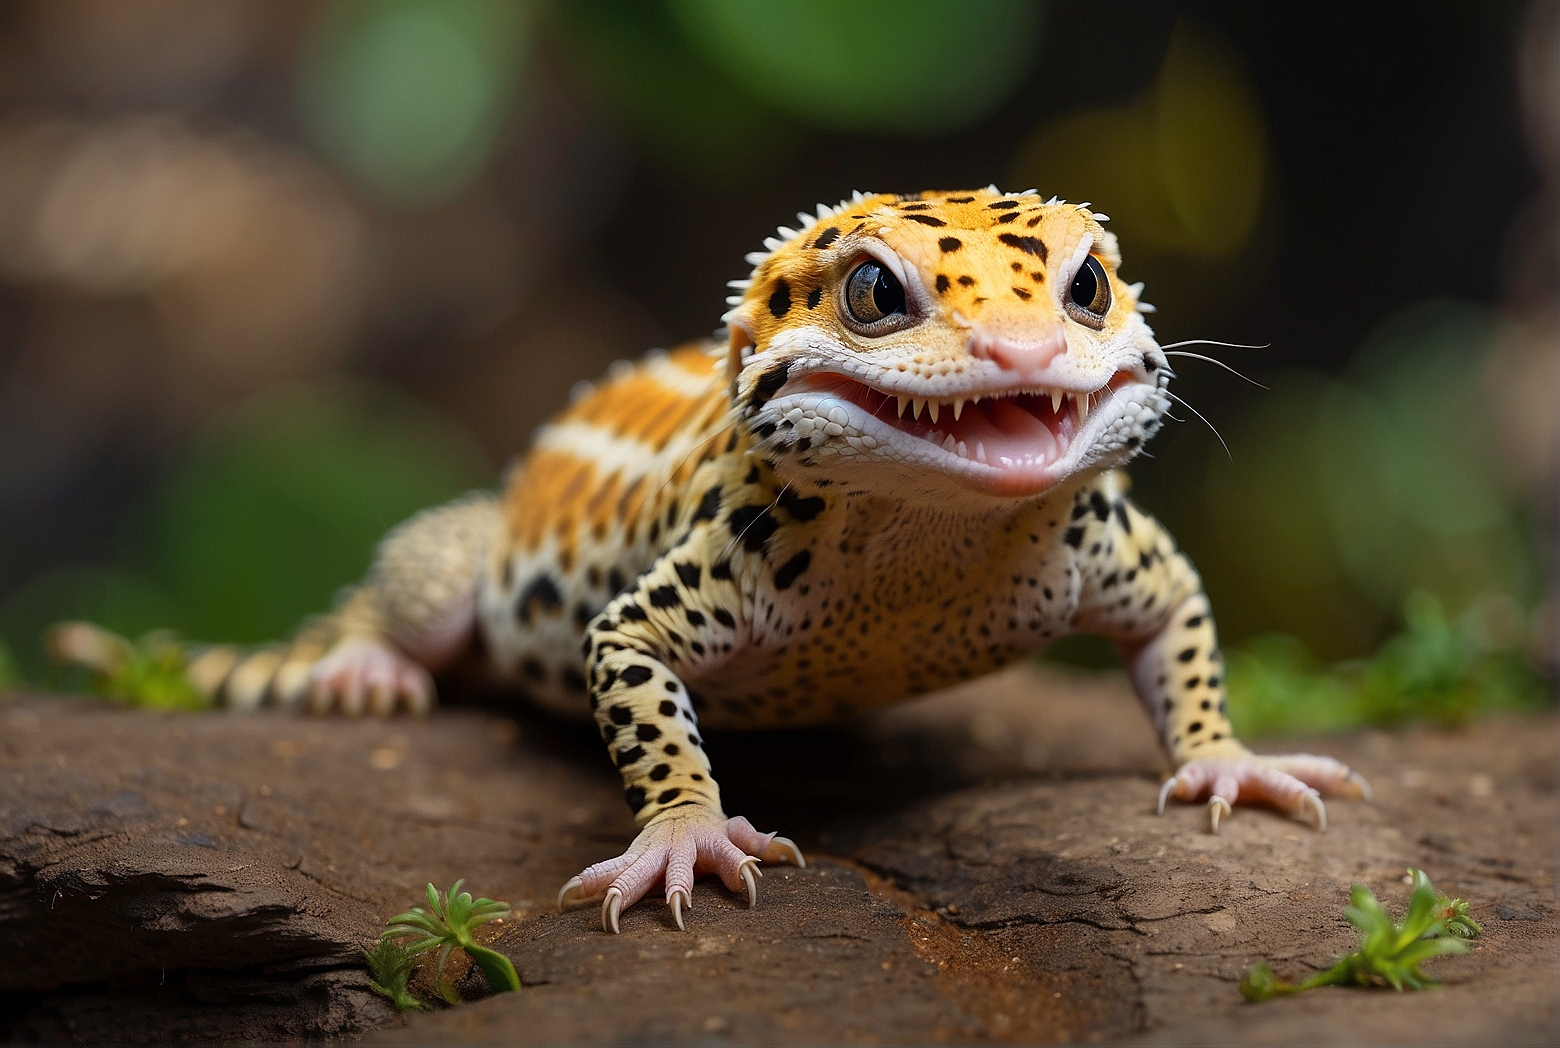 How Do I Know If My Leopard Gecko Is Happy?